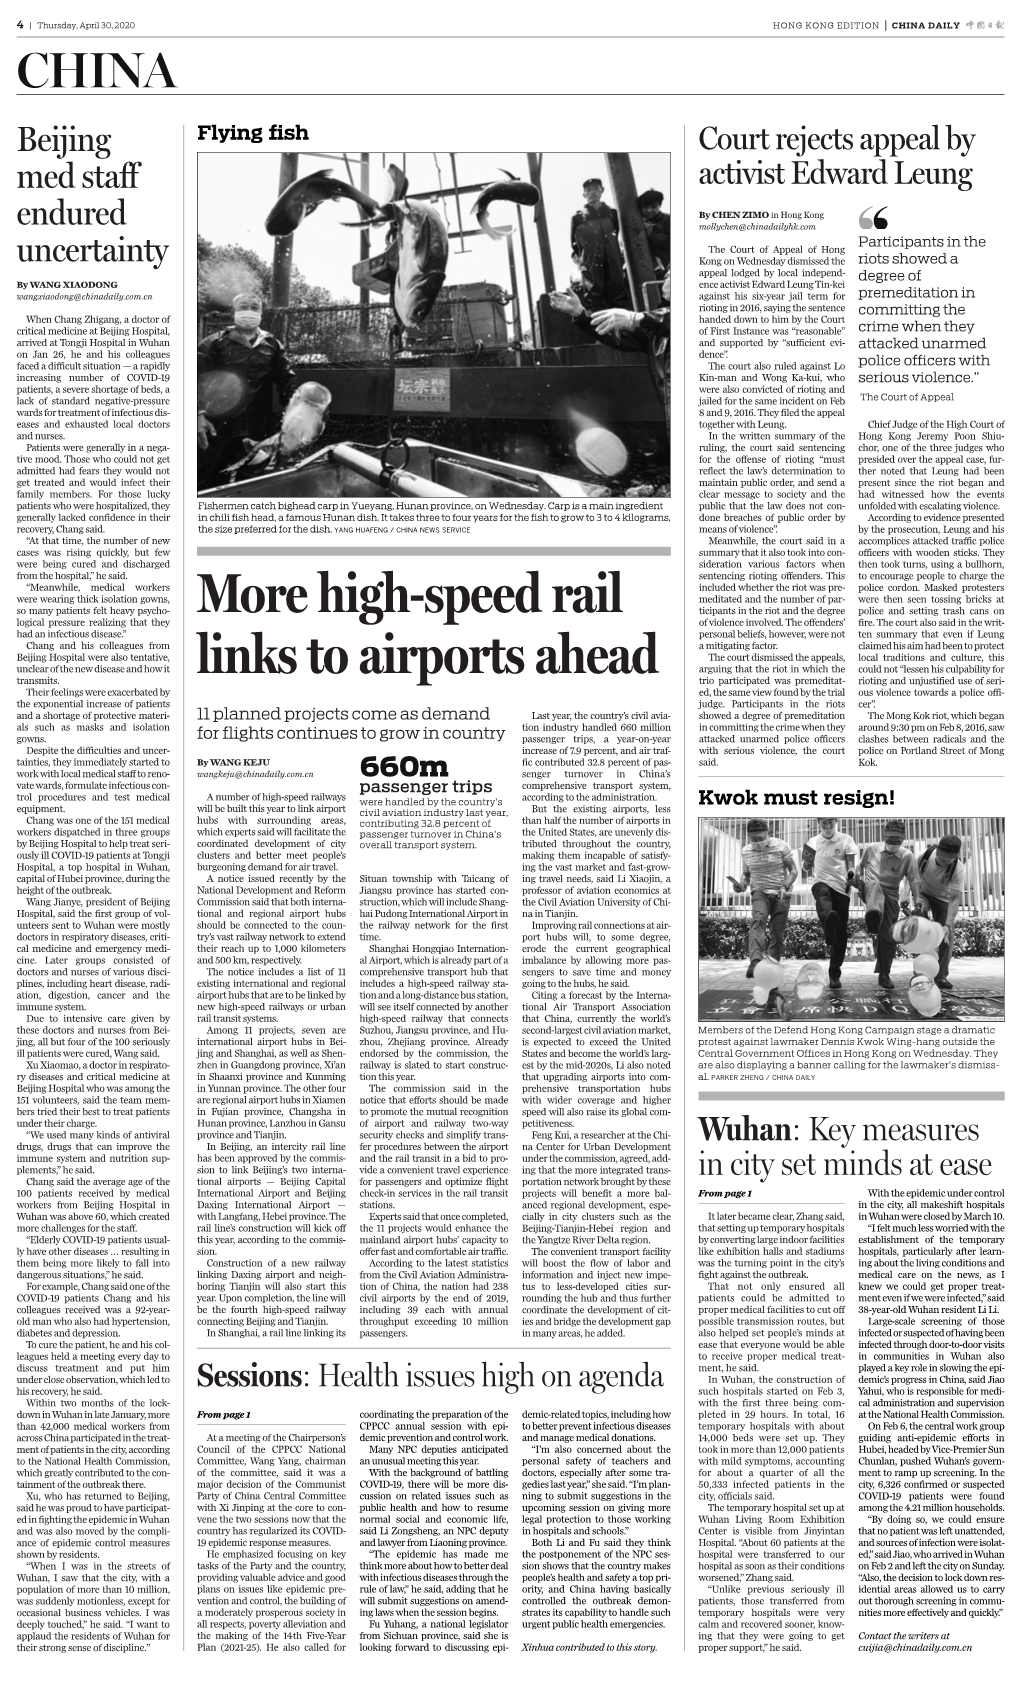 Highspeed Rail Links to Airports Ahead